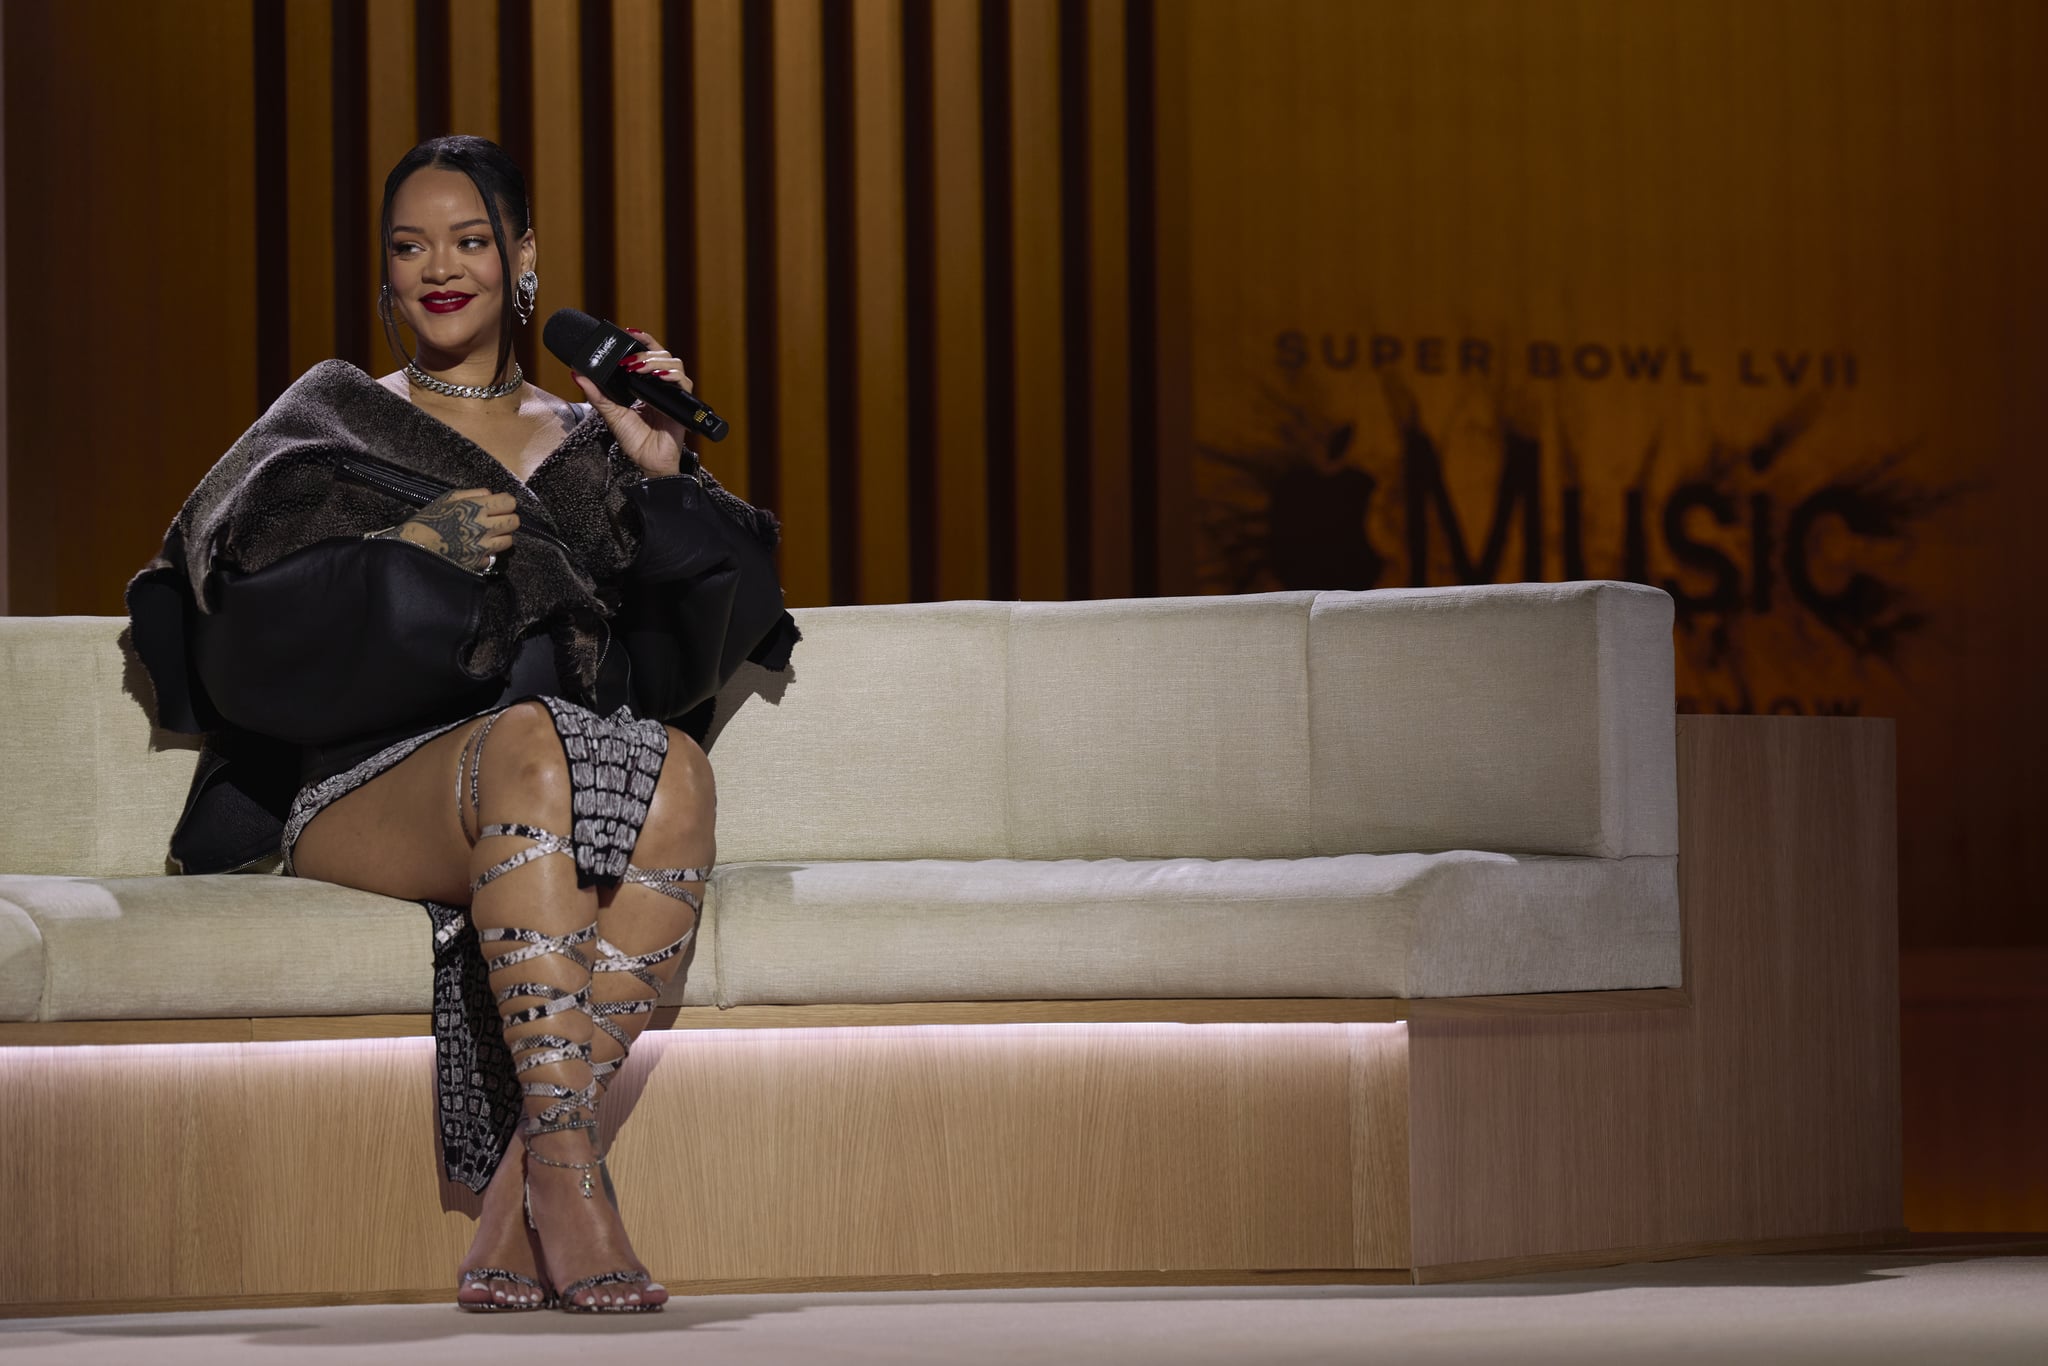 PHOENIX, AZ - FEBRUARY 09: Rihanna speaks during a press conference for the Apple Music Super Bowl 57 halftime show at the Phoenix Convention Center on February 9, 2023 in Phoenix, Arizona. (Photo by Cooper Neill/Getty Images)